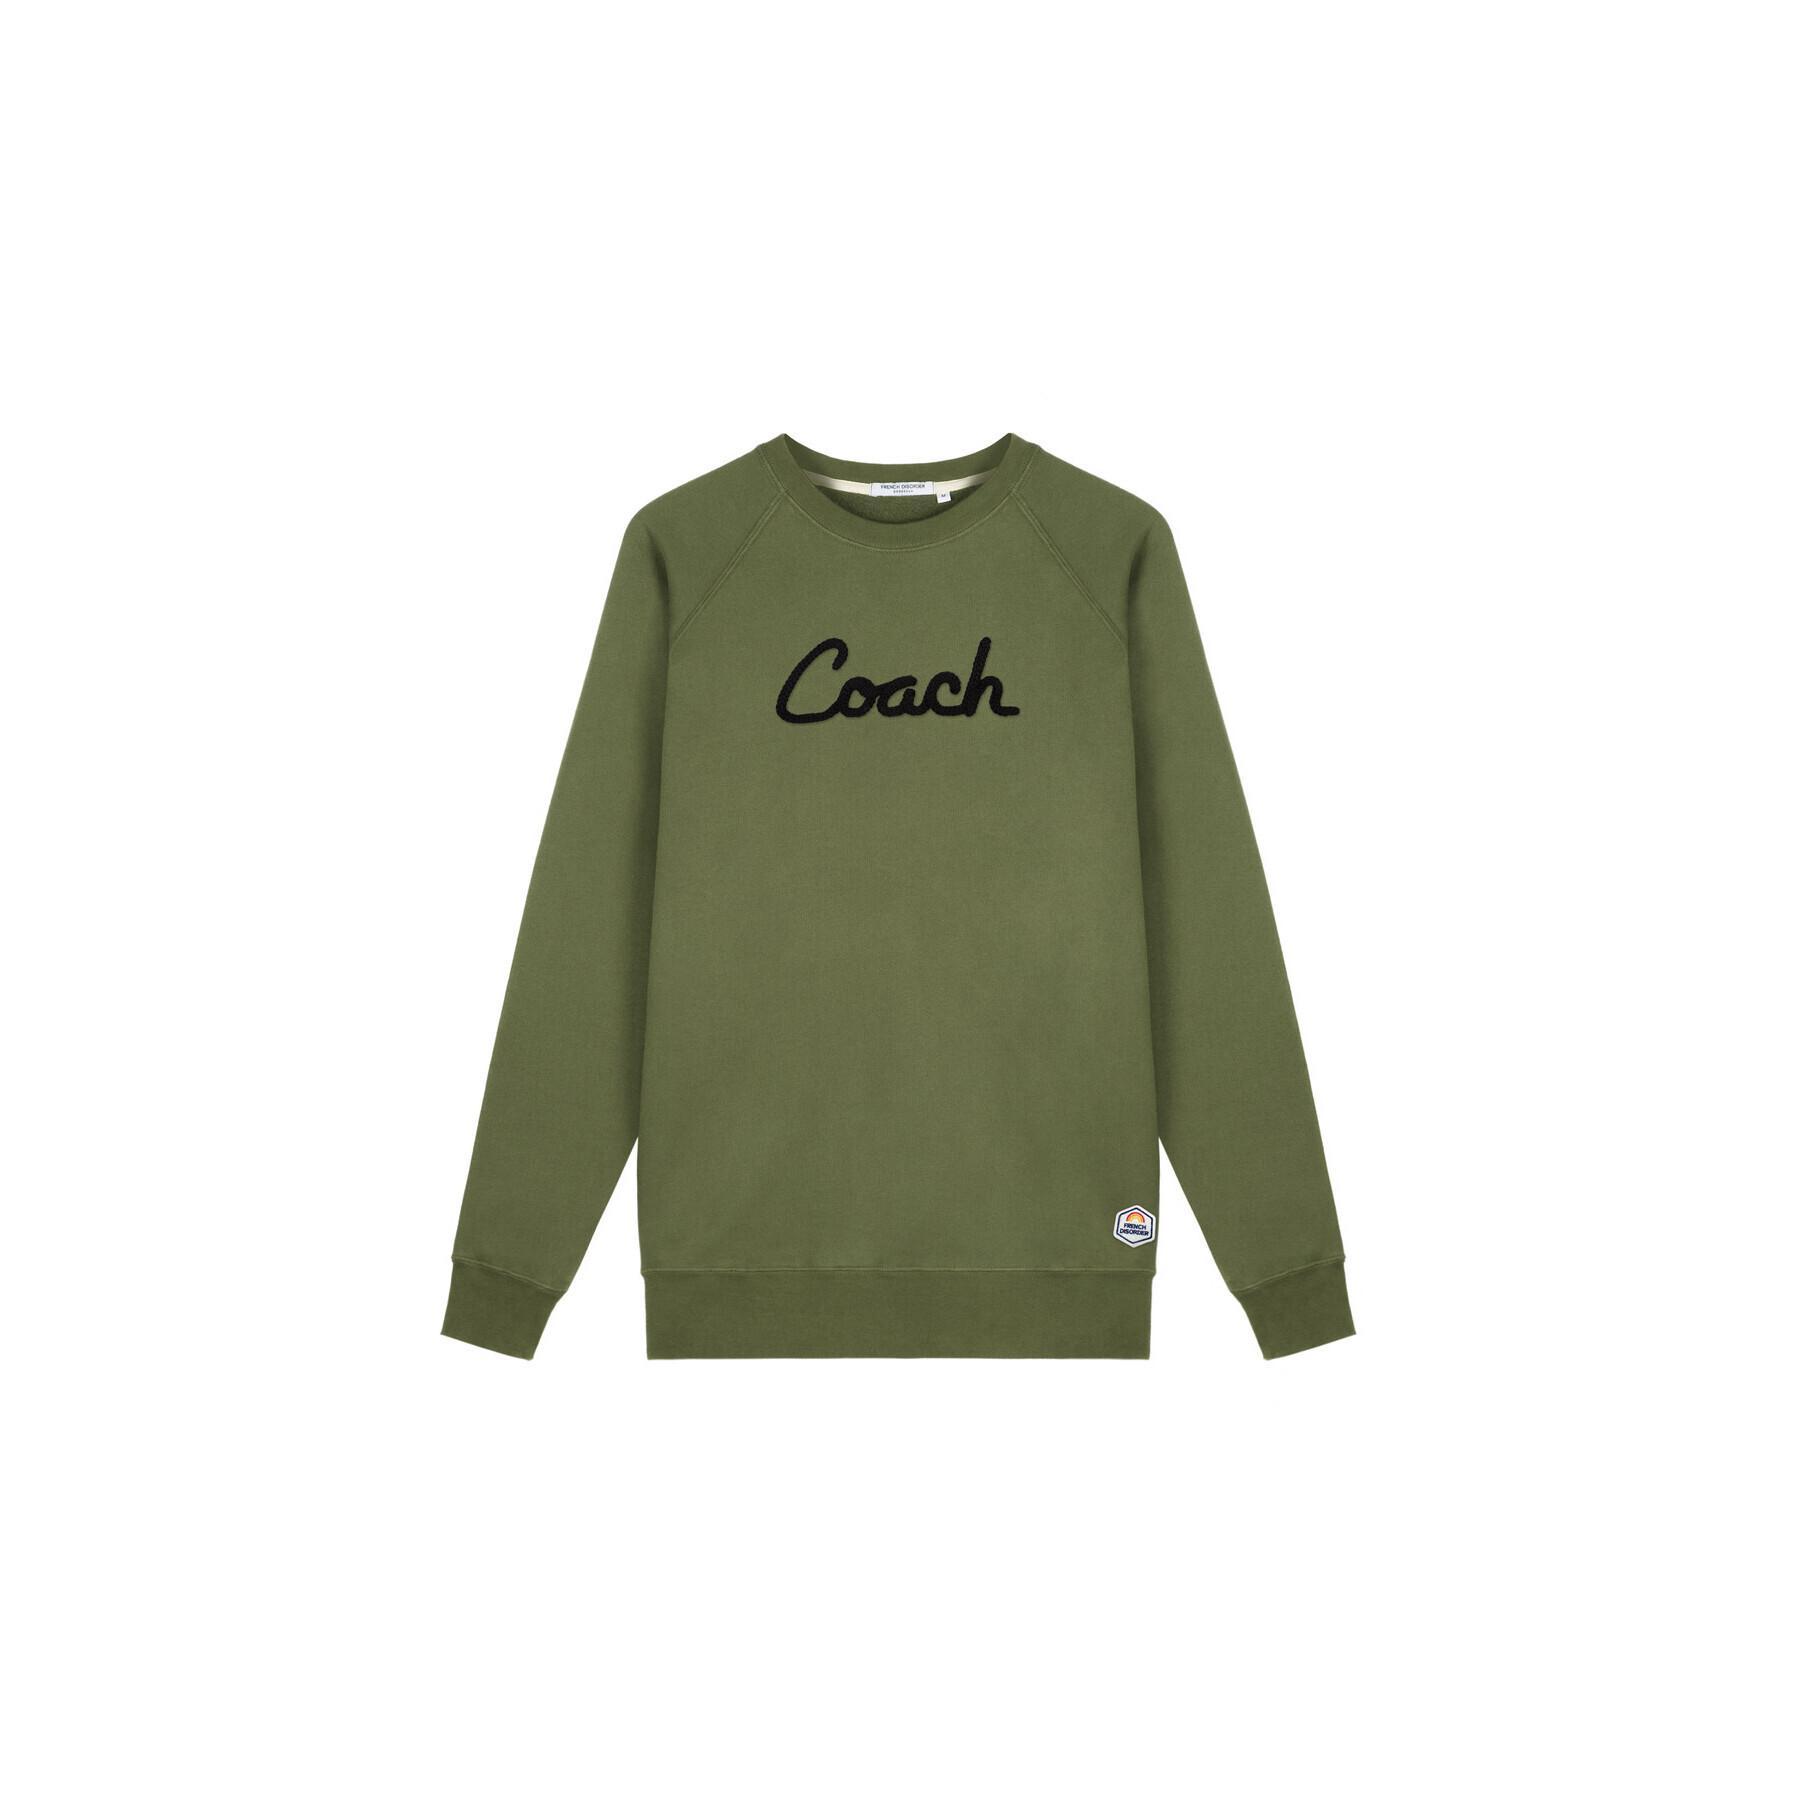 Sweatshirt French Disorder Clyde Coach